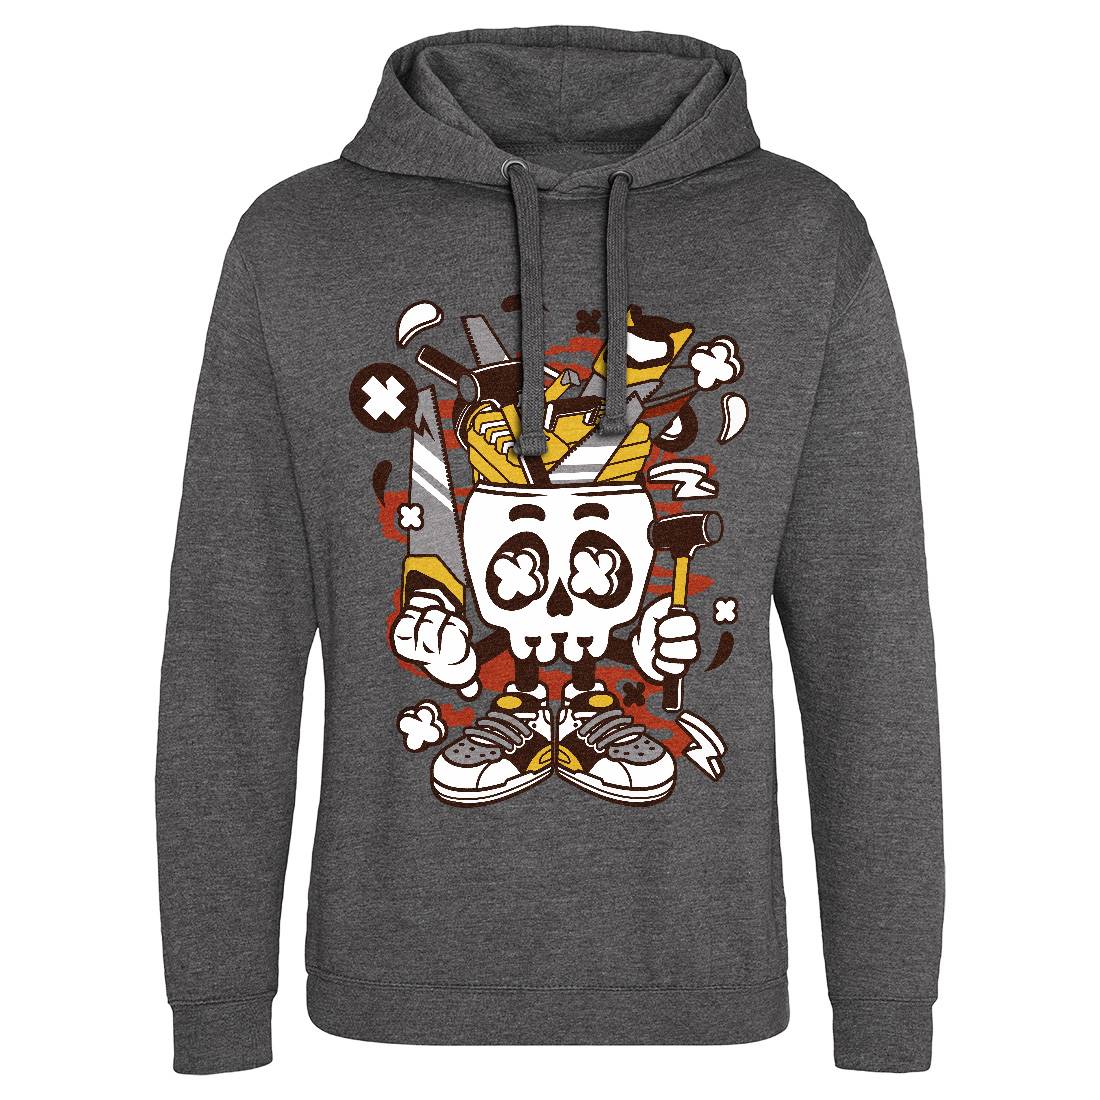 Carpentry Skull Mens Hoodie Without Pocket Work C047